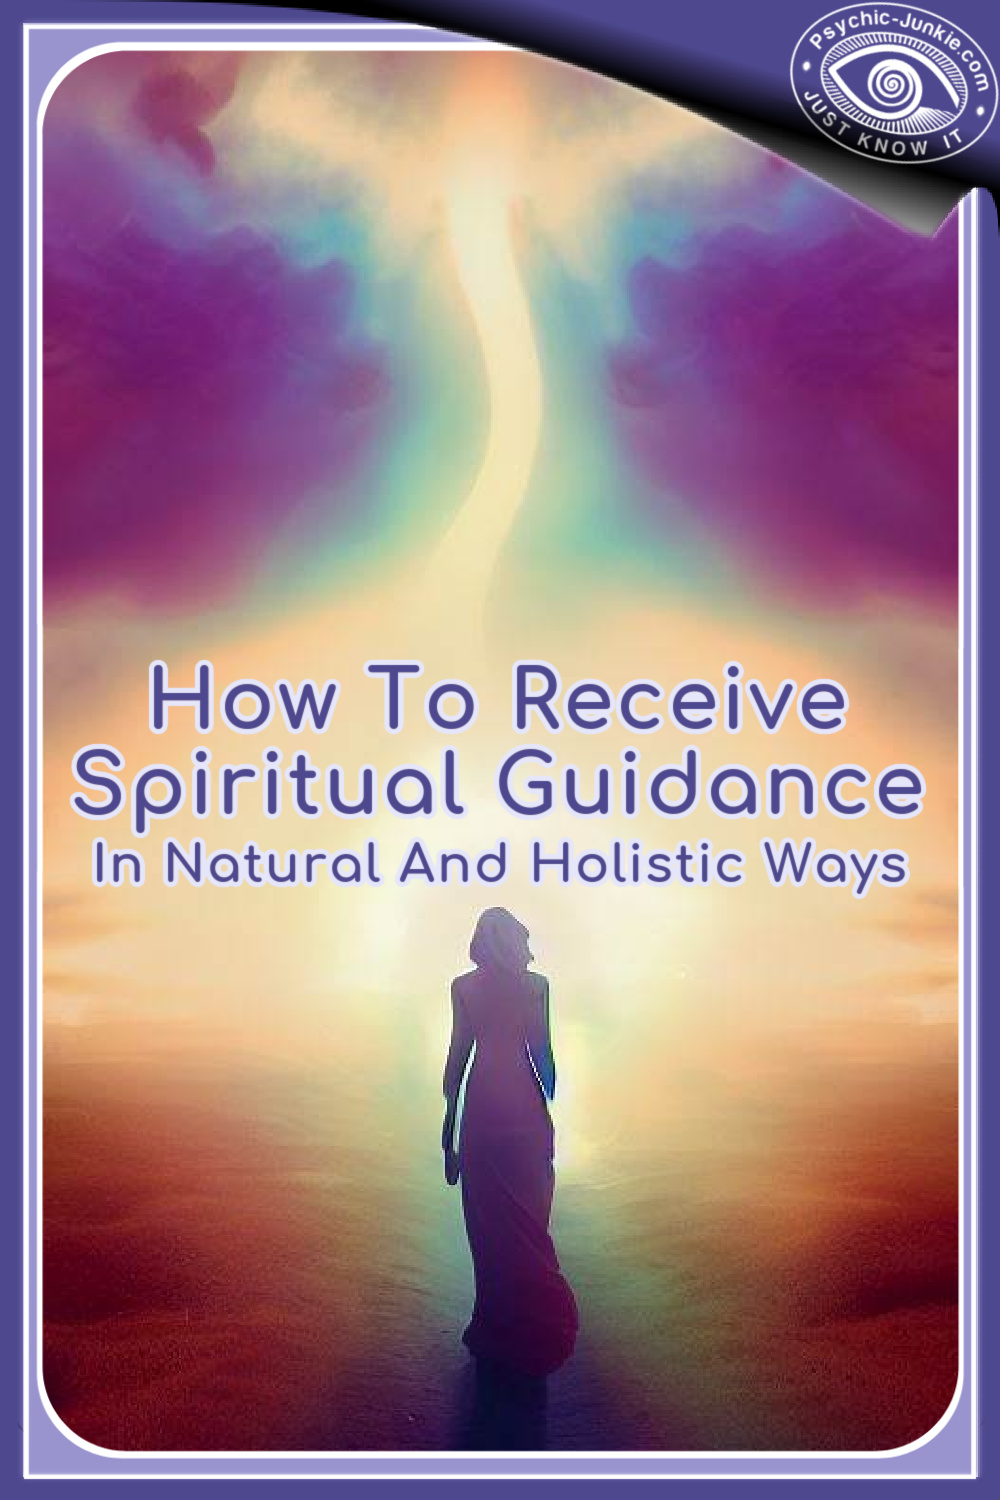 How To Receive Spiritual Guidance In Natural And Holistic Ways